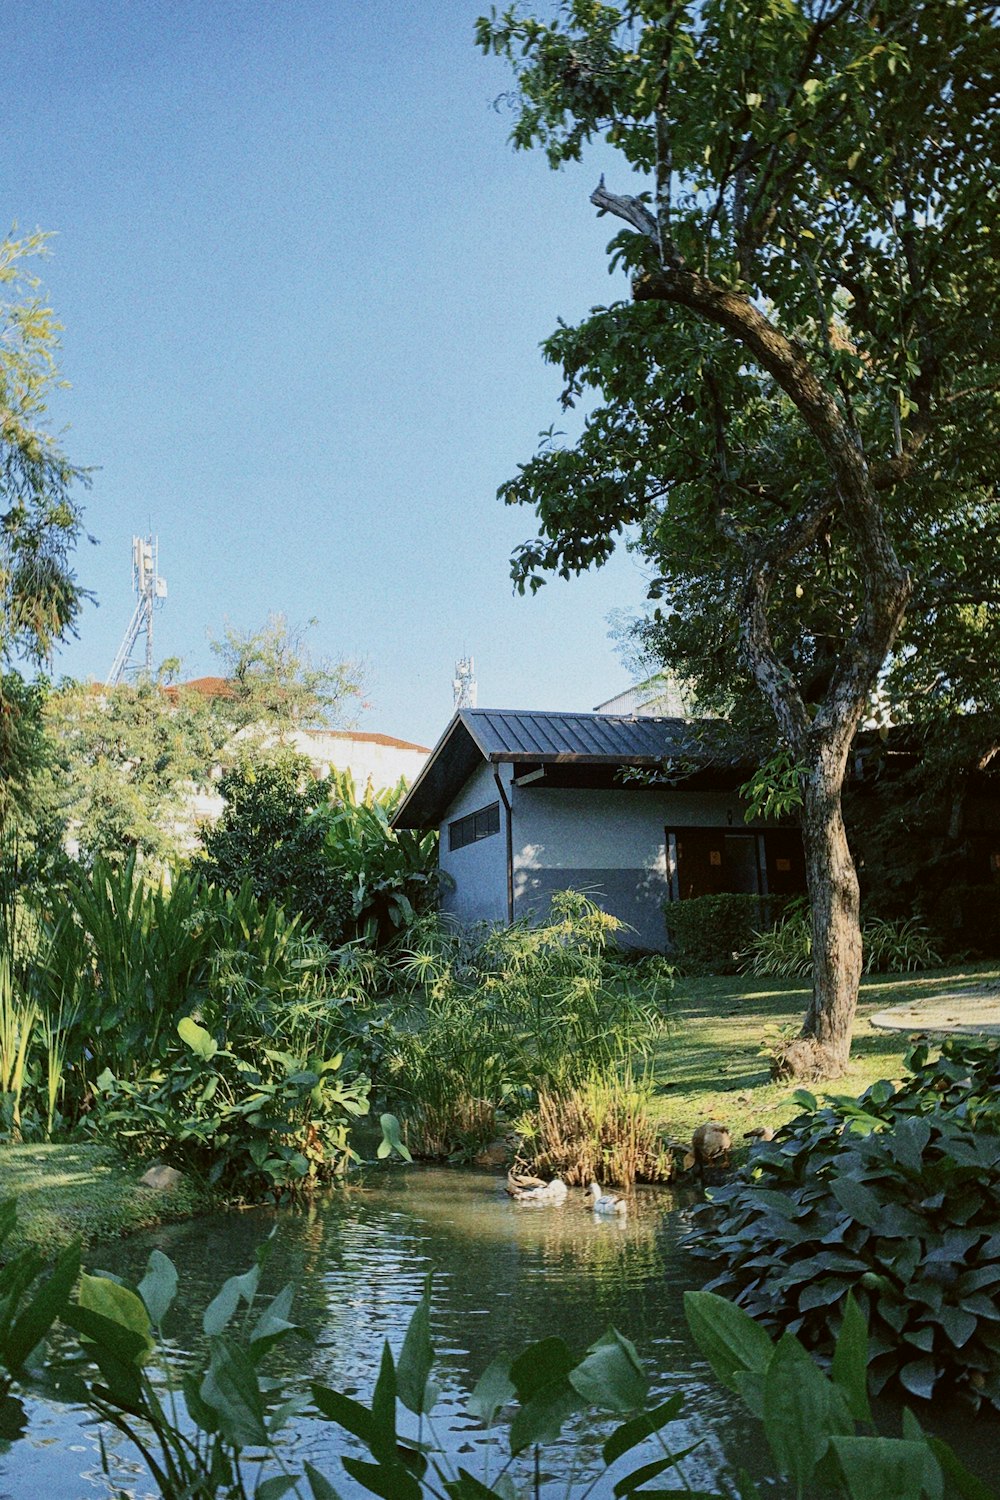 a pond in front of a house surrounded by trees